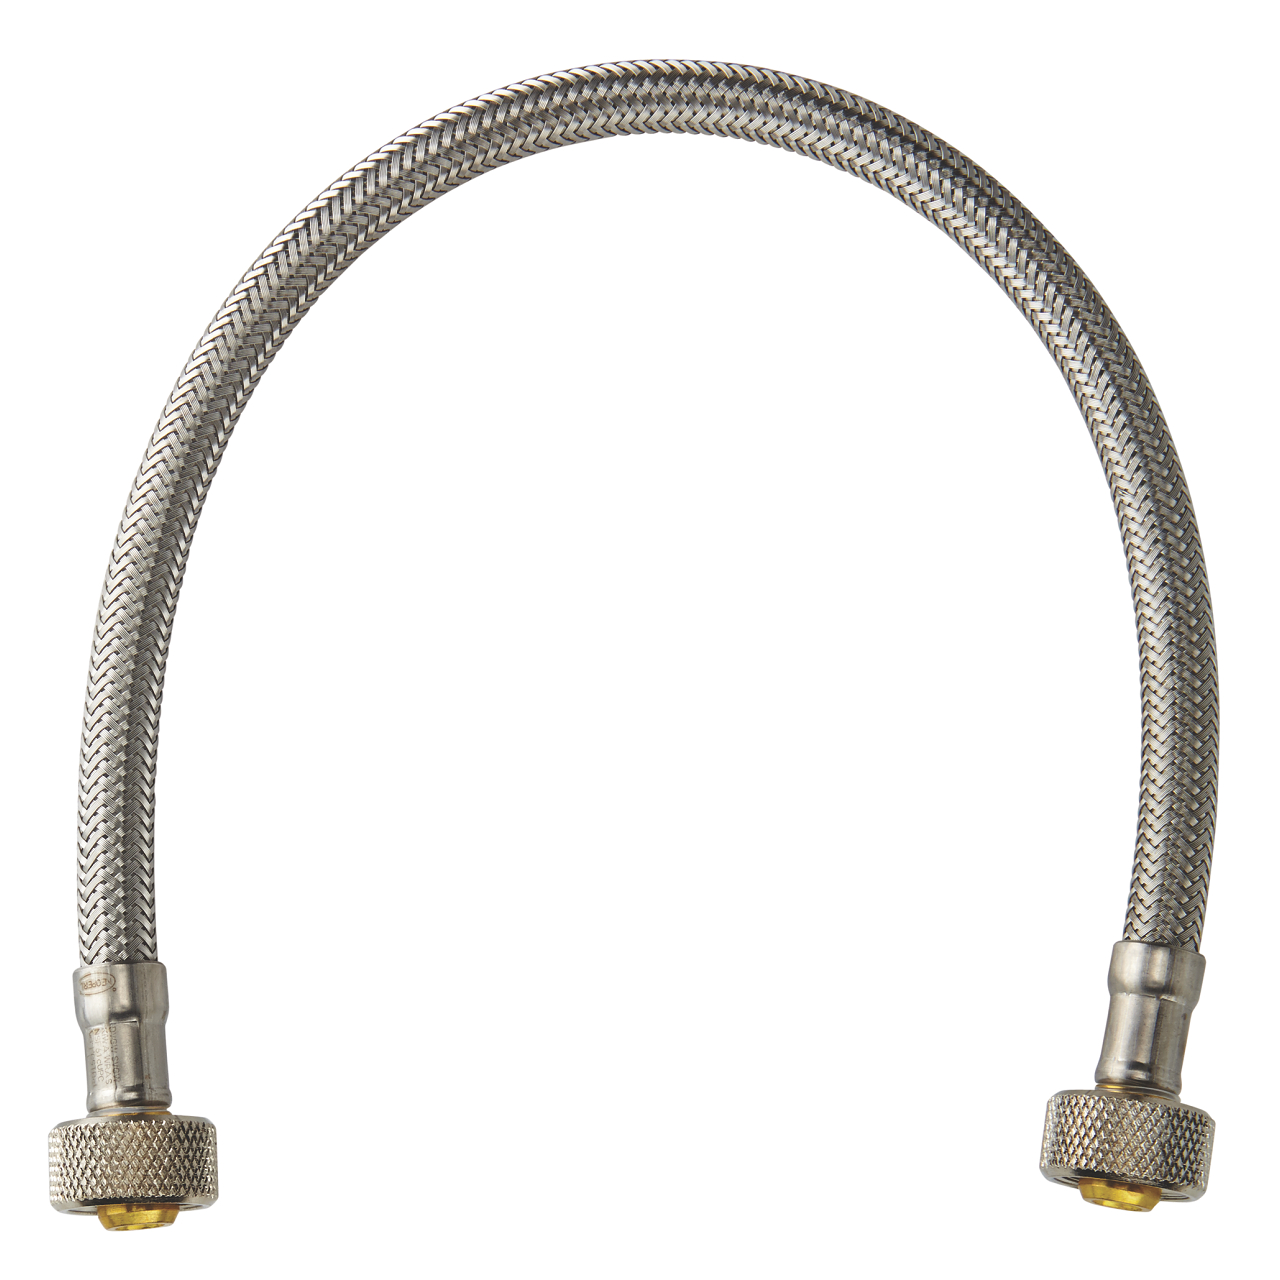 GROHE connection hose